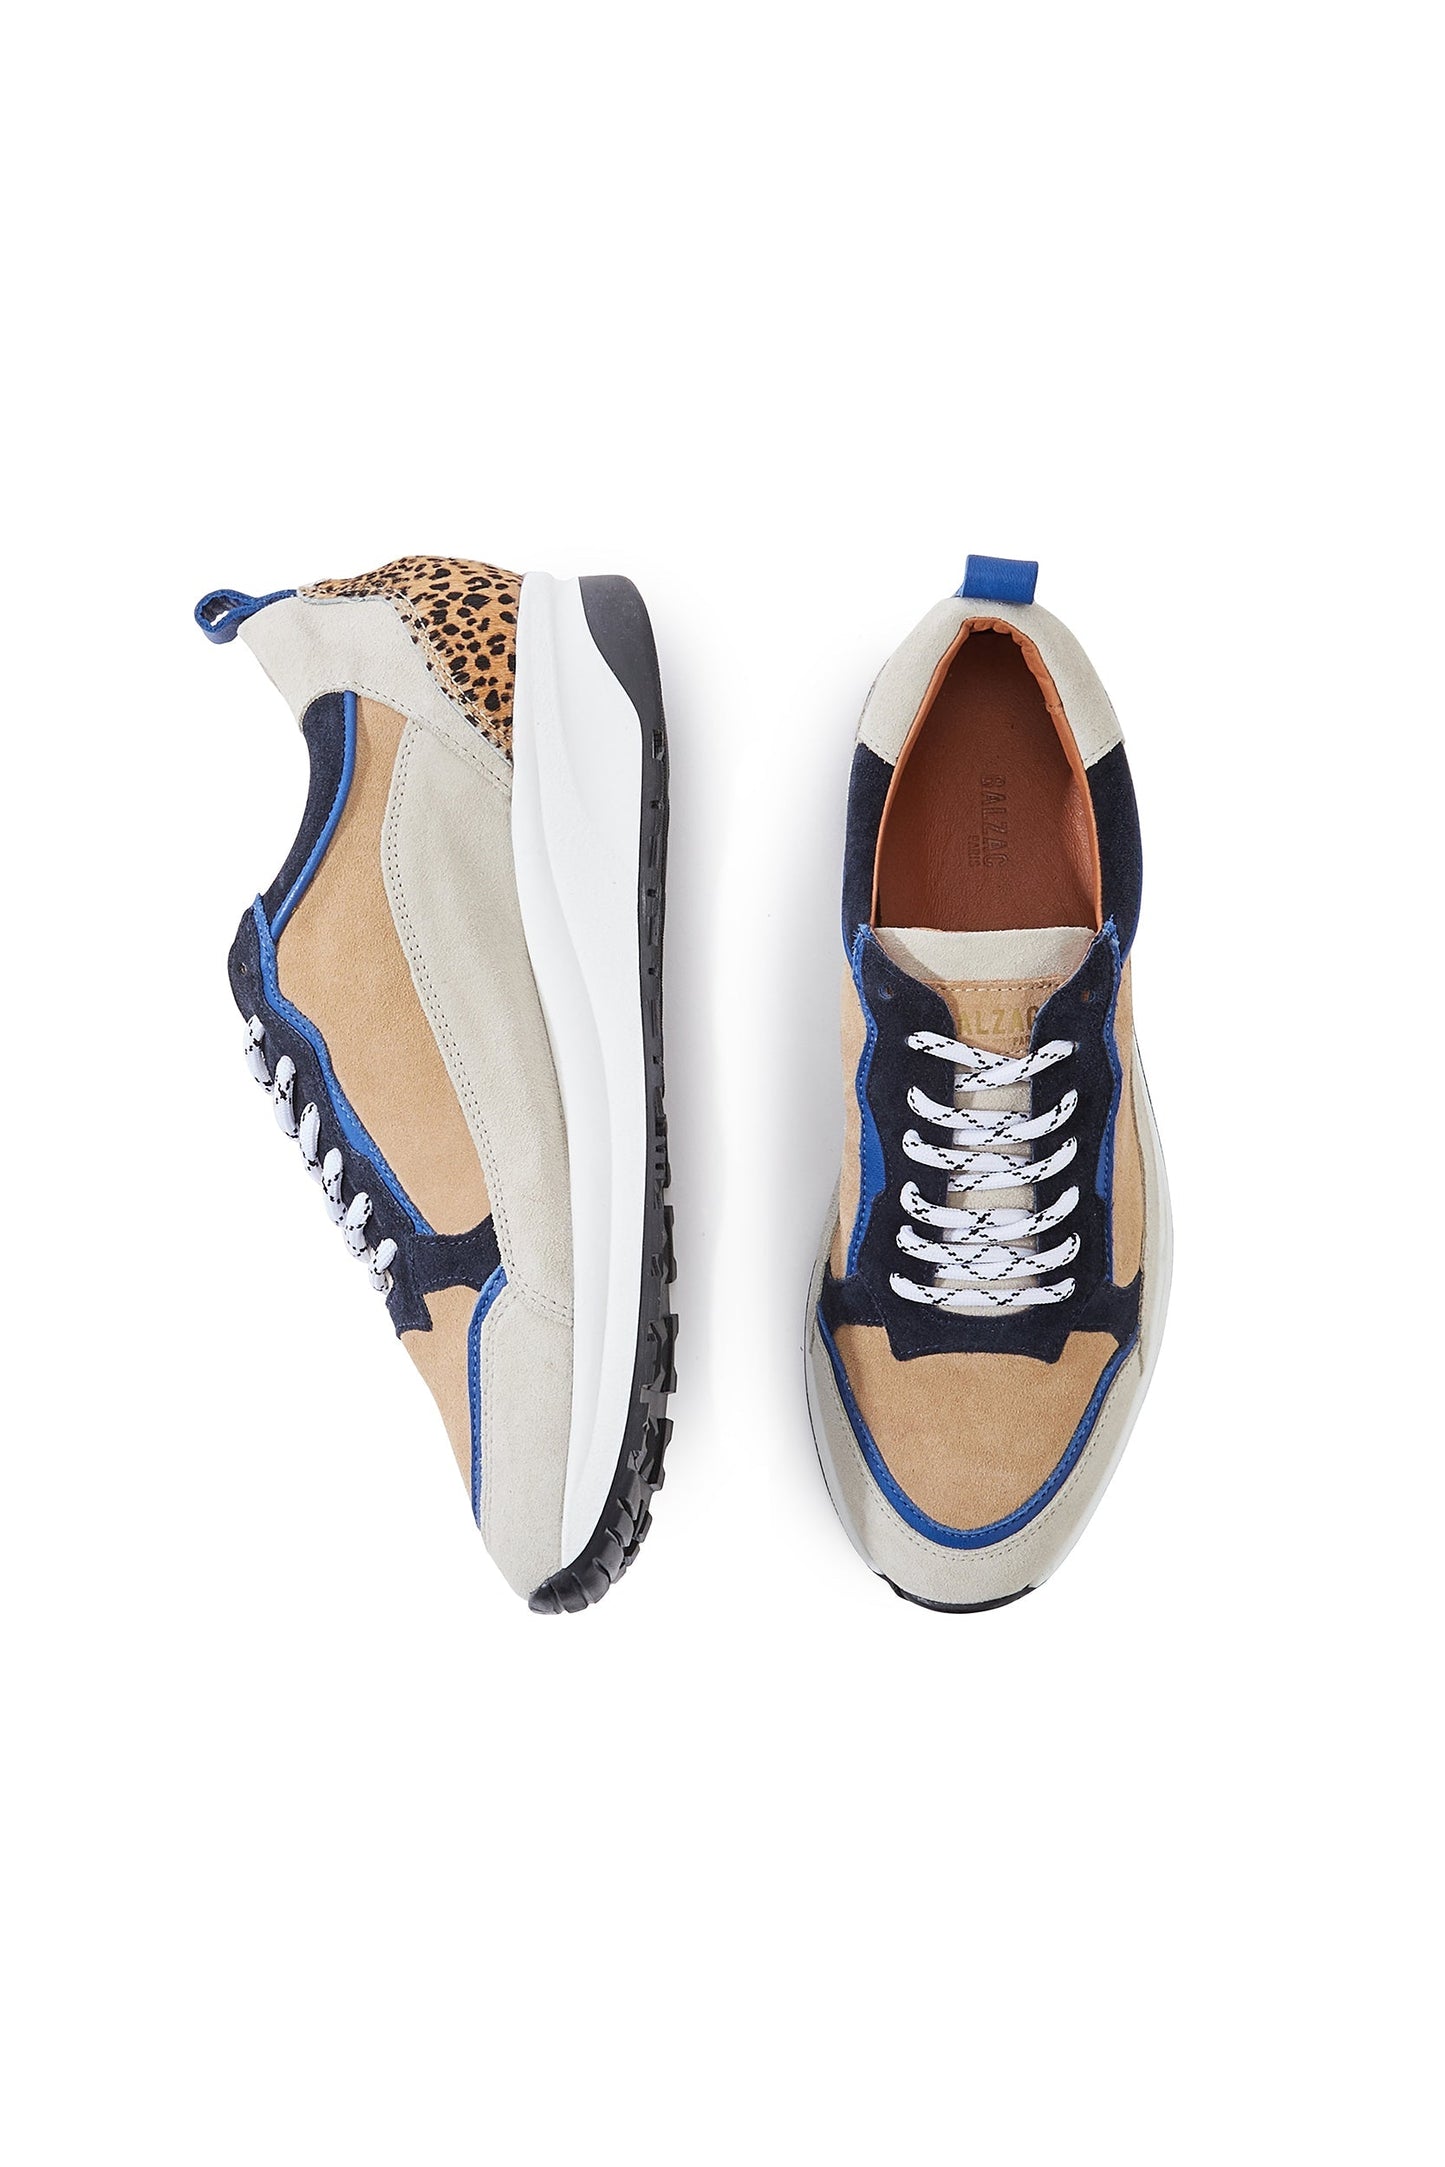 cheetah and blue maximilien sneakers